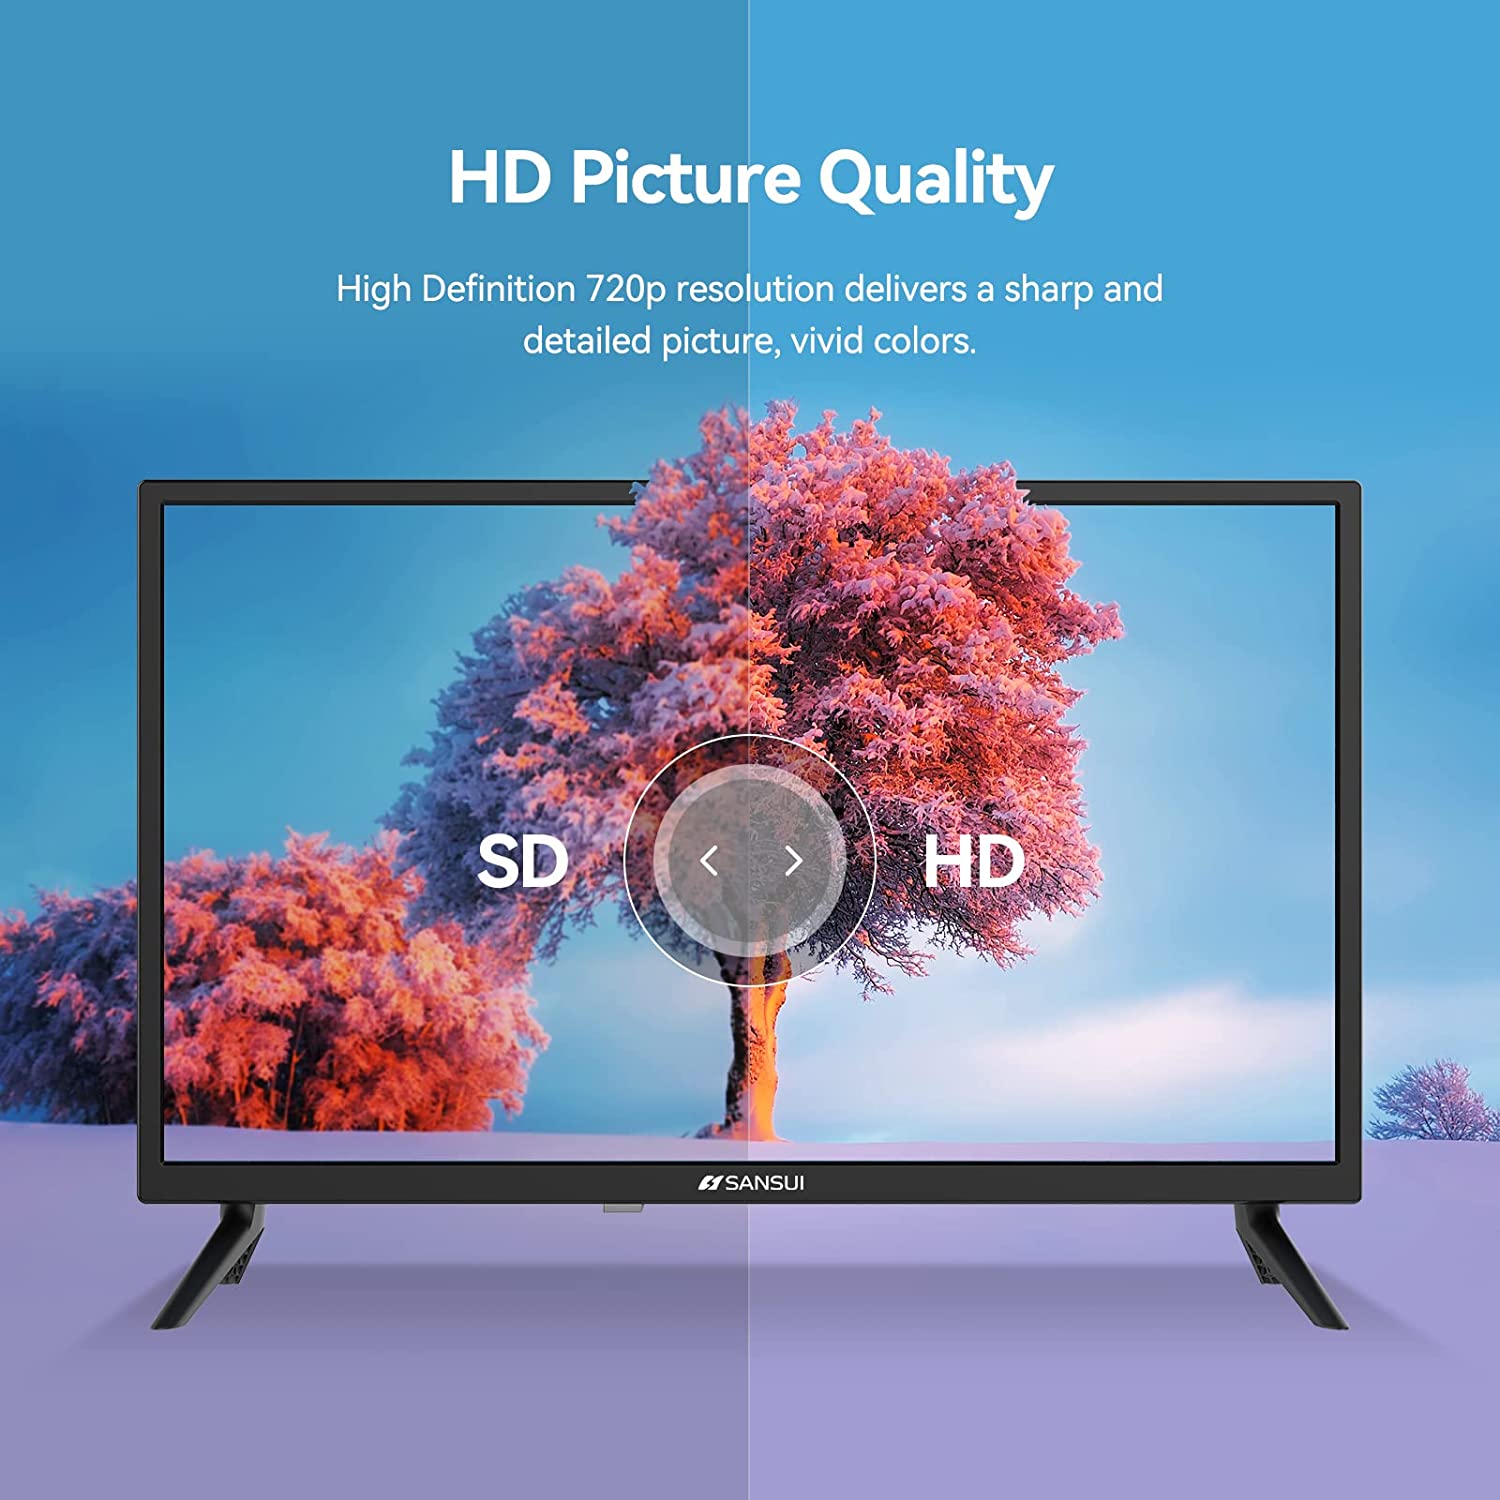 24 Inch High Definition Television